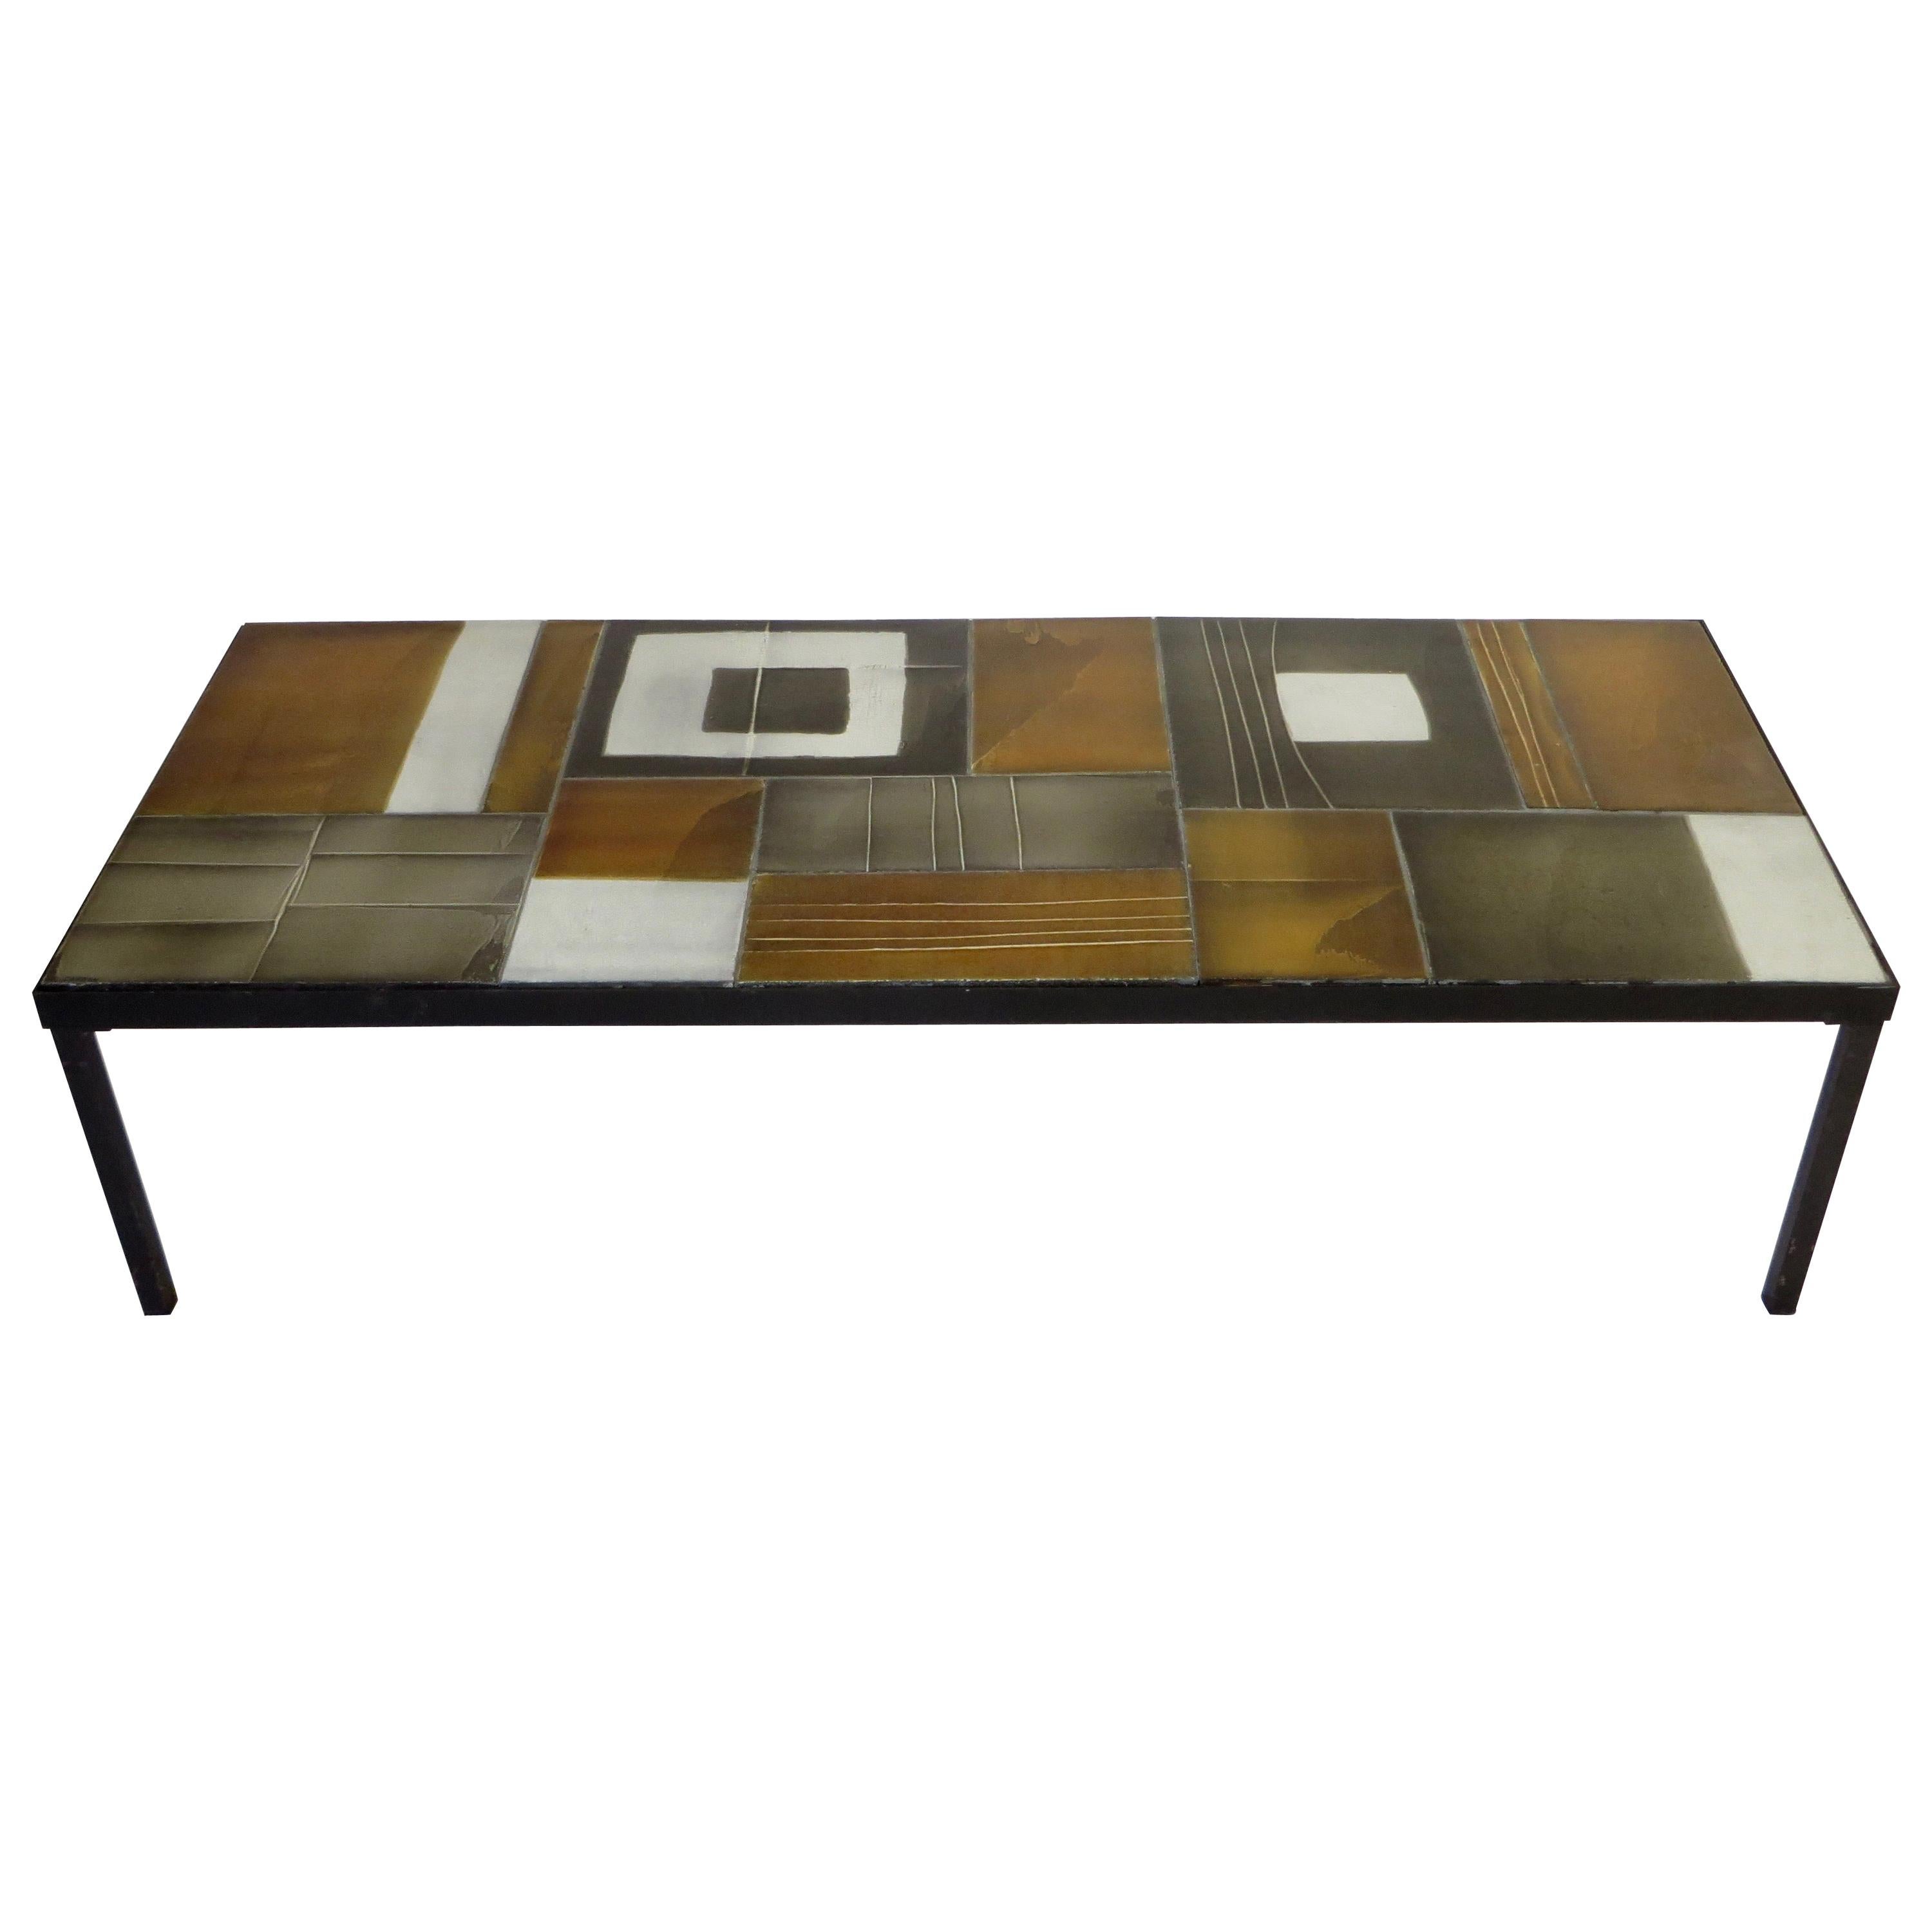 Roger Capron Multi-Color Ceramic Coffee Table in Amber Ochre Gray and White 